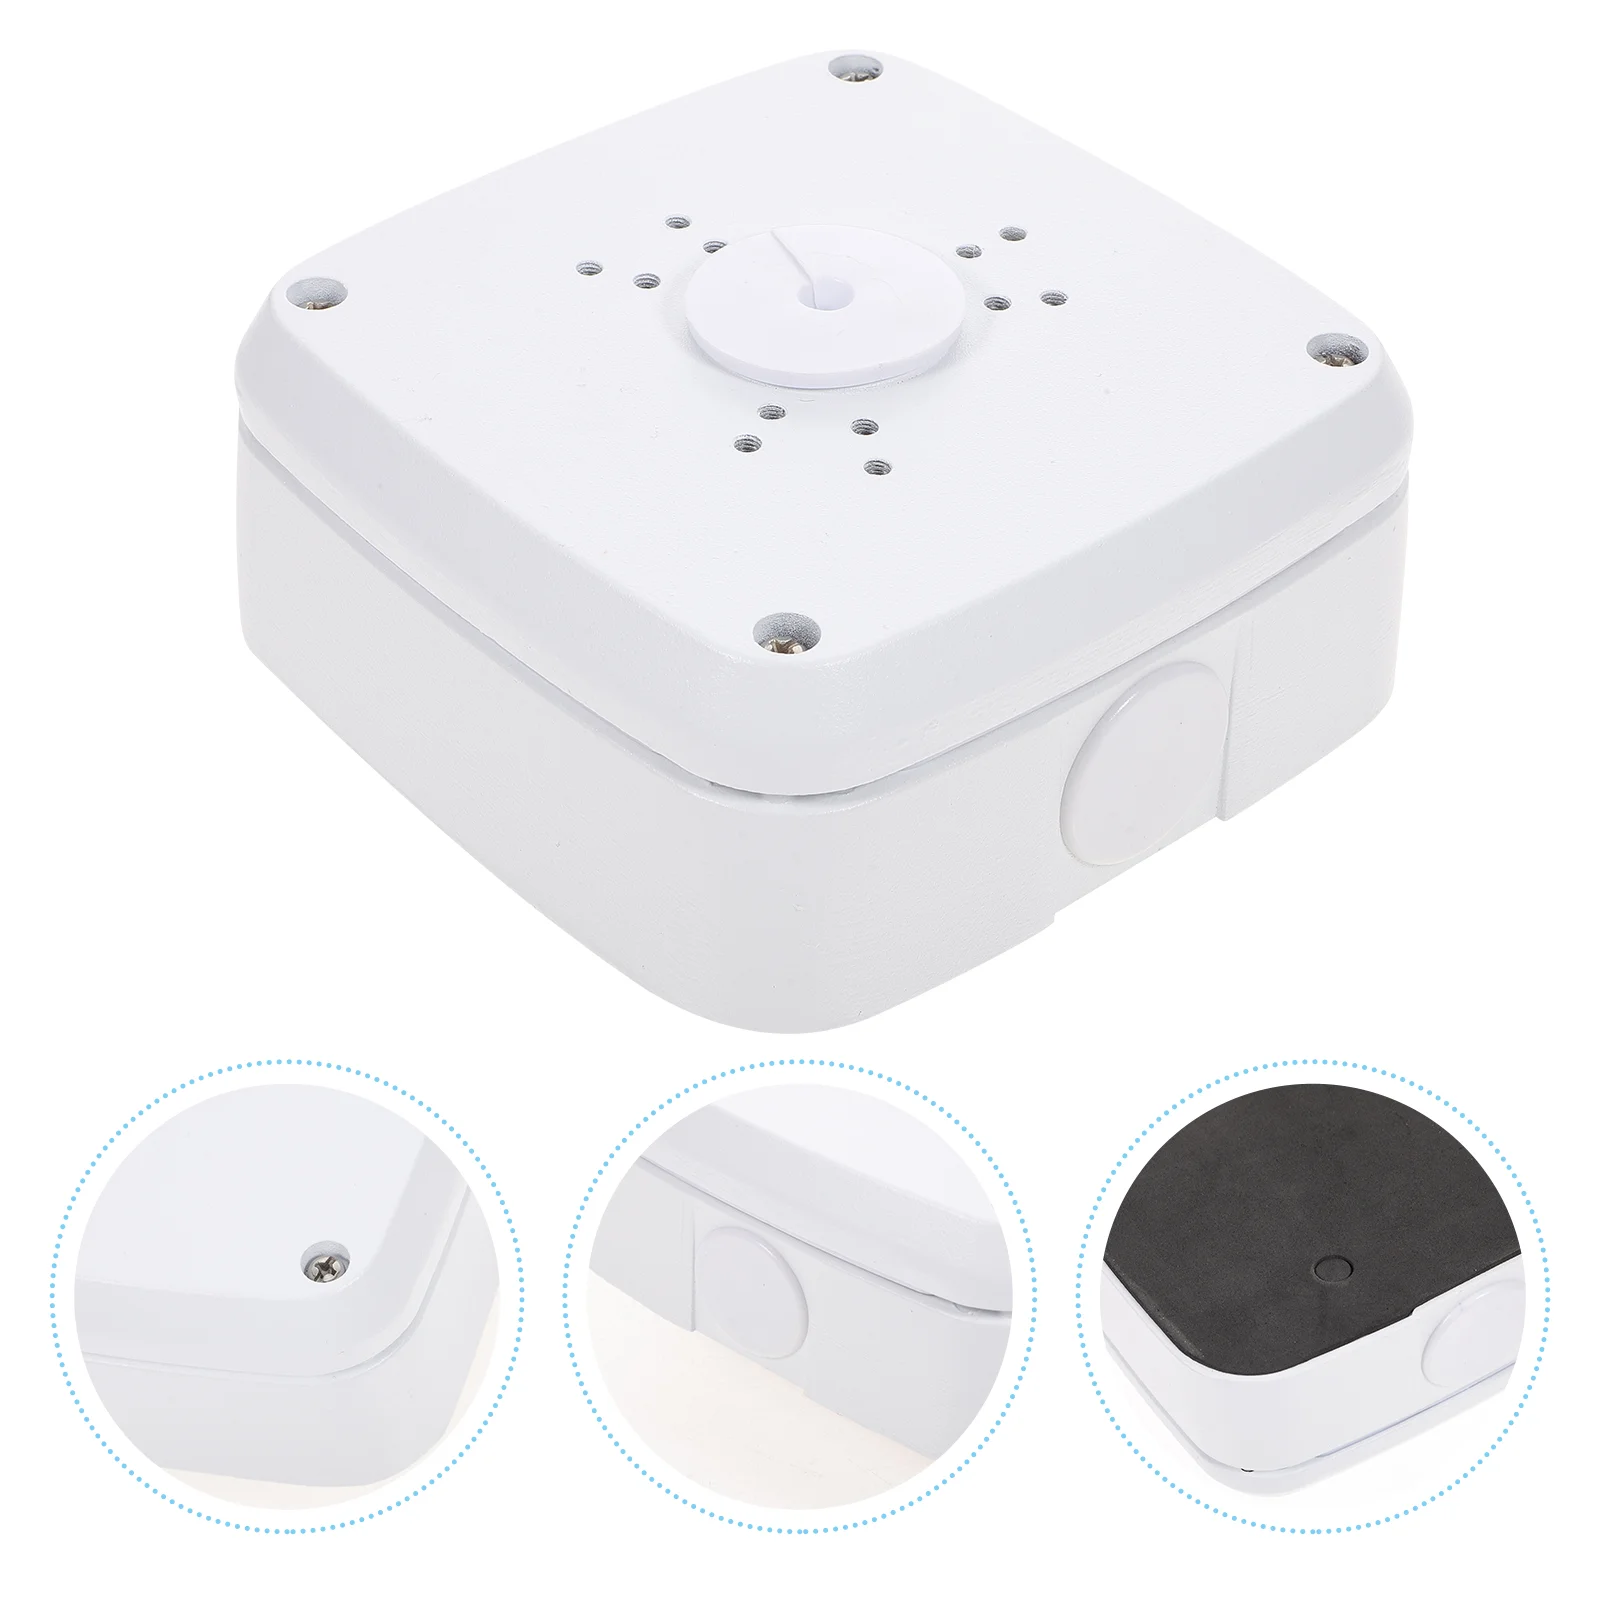 

Box Junction Camerawaterproof Outdoorline Storage Electrical Mounting Ceiling Cctv Cameras Dome Base Cable Bullet Hide Mount